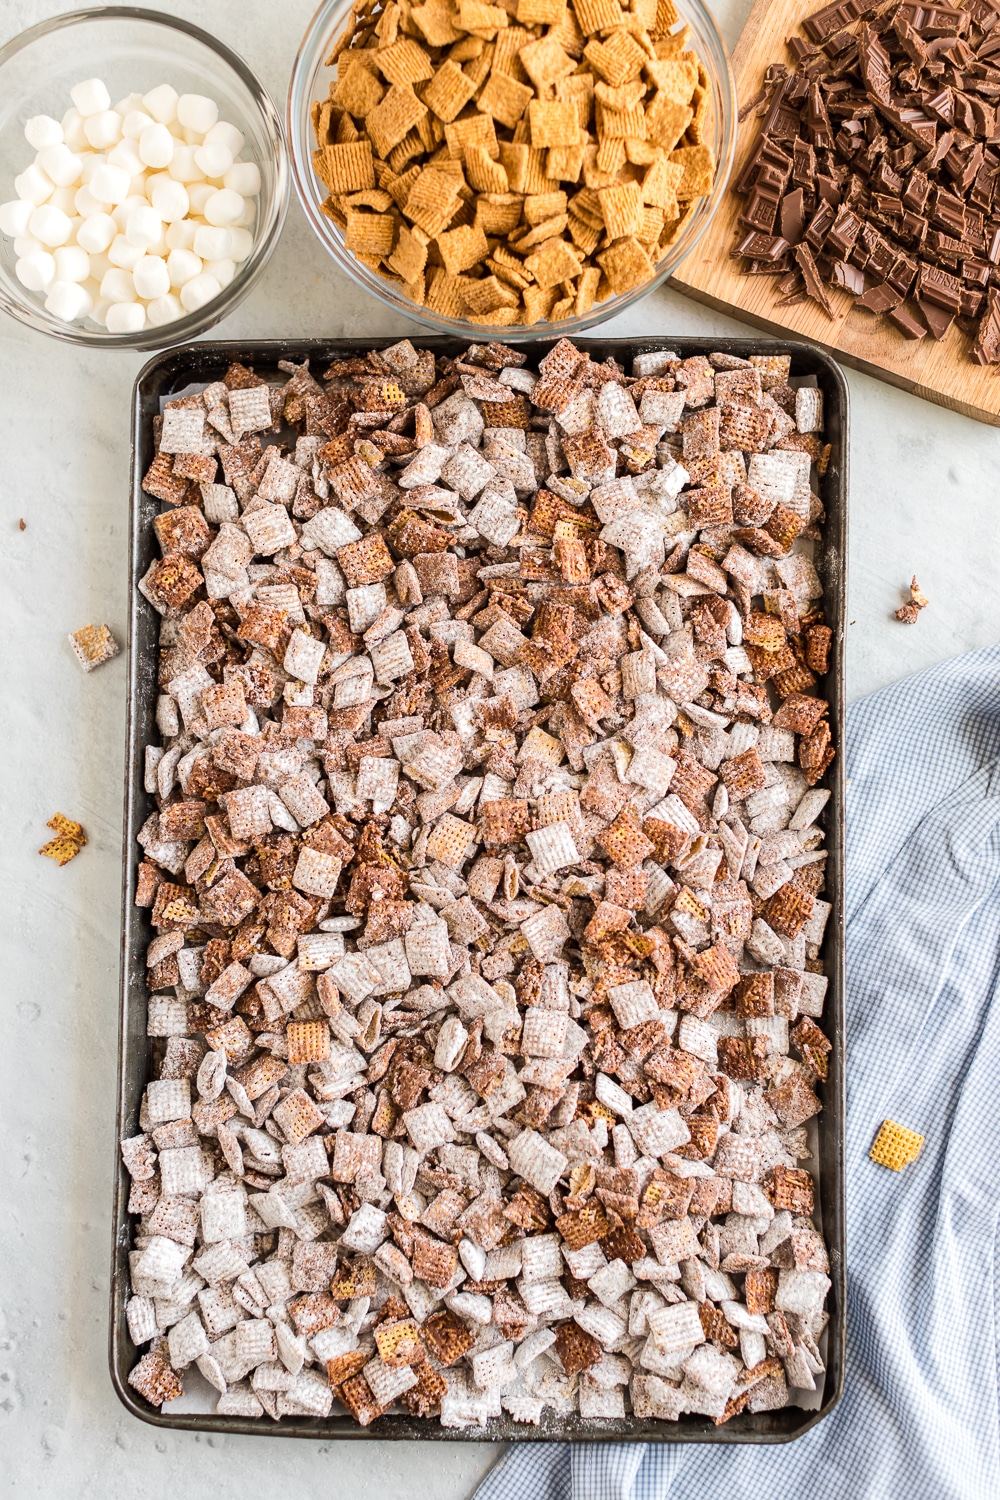 S'mores Puppy Chow:  chocolate and peanut butter coated cereal is mixed with mini marshmallows, graham crackers and chocolate for a delicious summer treat that's a twist from a classic puppy chow recipe. 